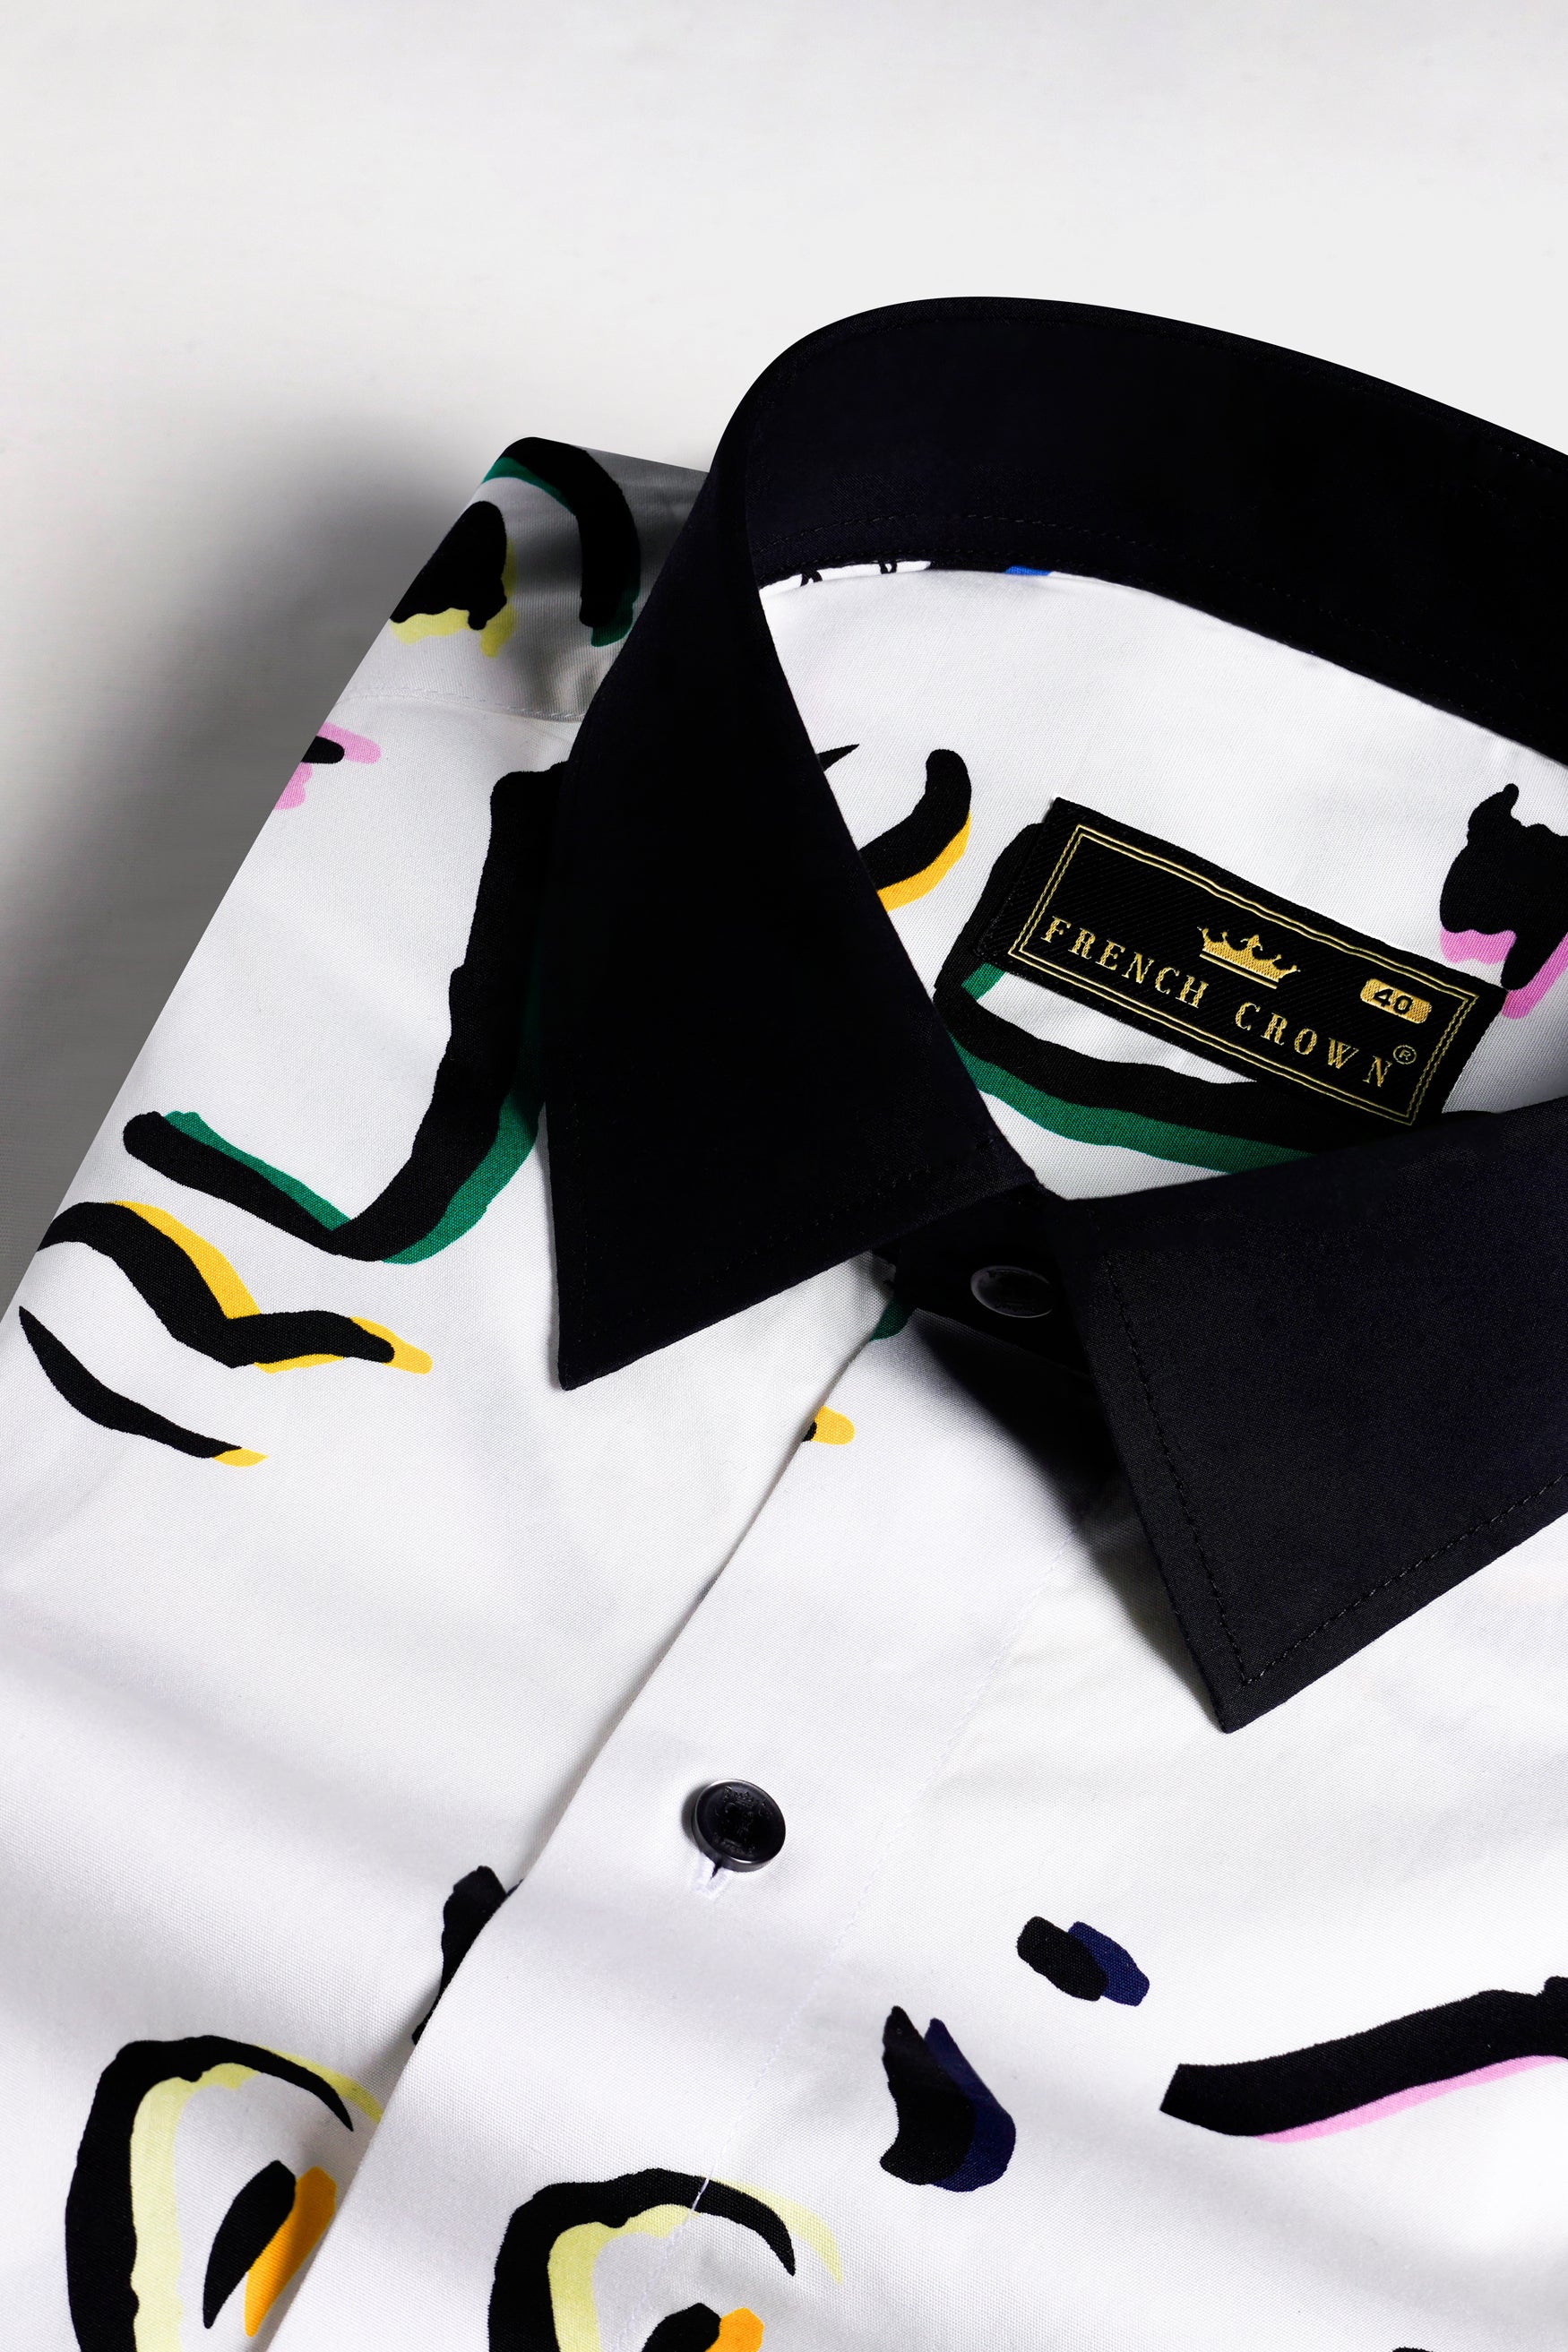 Bright White Faces Printed with Black Cuffs and Collar Premium Cotton Shirt 11433-BCC-BLK-38, 11433-BCC-BLK-H-38, 11433-BCC-BLK-39, 11433-BCC-BLK-H-39, 11433-BCC-BLK-40, 11433-BCC-BLK-H-40, 11433-BCC-BLK-42, 11433-BCC-BLK-H-42, 11433-BCC-BLK-44, 11433-BCC-BLK-H-44, 11433-BCC-BLK-46, 11433-BCC-BLK-H-46, 11433-BCC-BLK-48, 11433-BCC-BLK-H-48, 11433-BCC-BLK-50, 11433-BCC-BLK-H-50, 11433-BCC-BLK-52, 11433-BCC-BLK-H-52